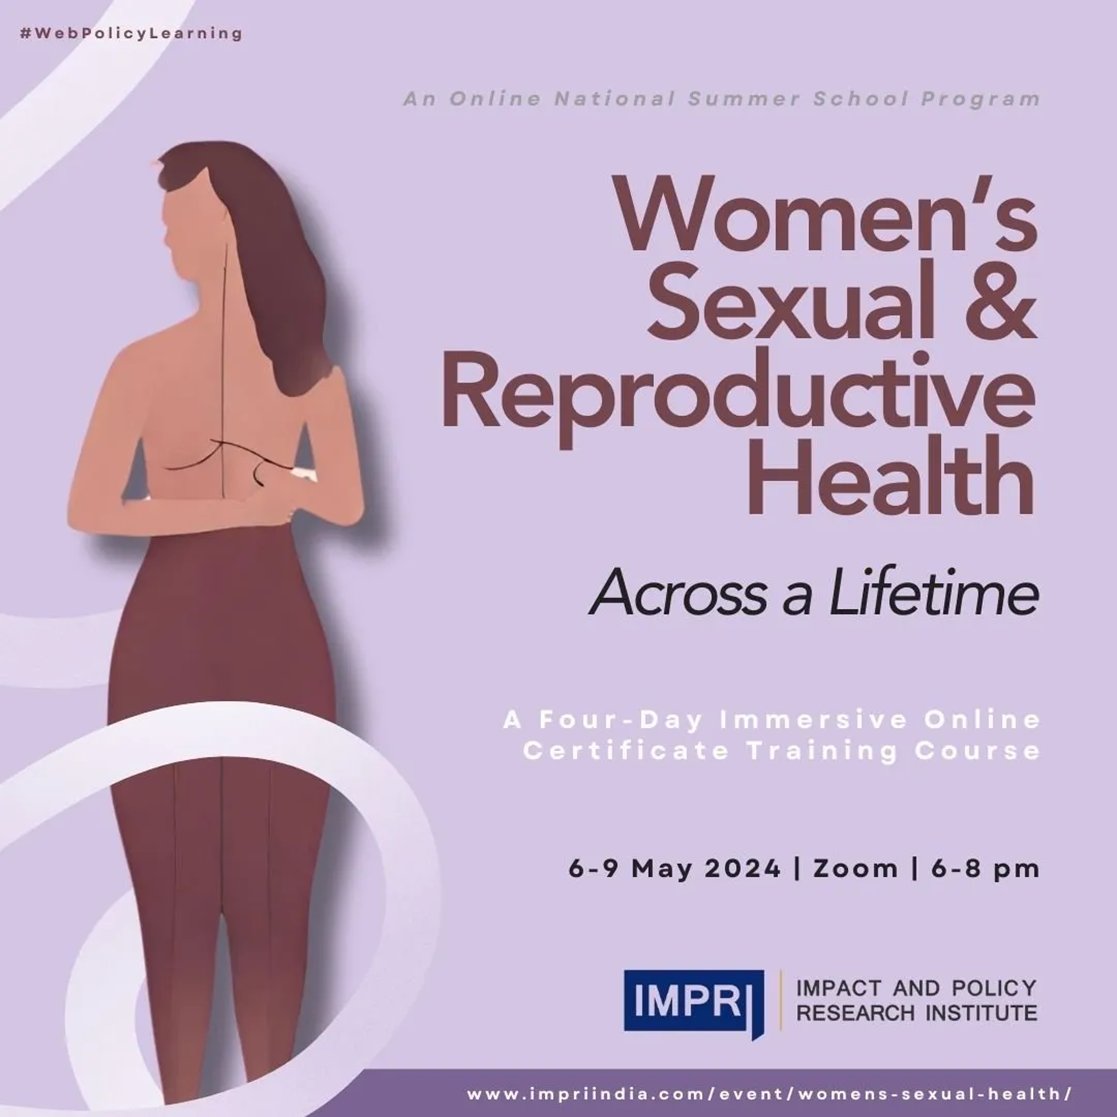 Glad to share that I will be speaking on 'Adolescent Changes: Body, Mind and Society' in IMPRI's Training Course on 'Women's Sexual & Reproductive Health: Across a Lifetime', this evening.